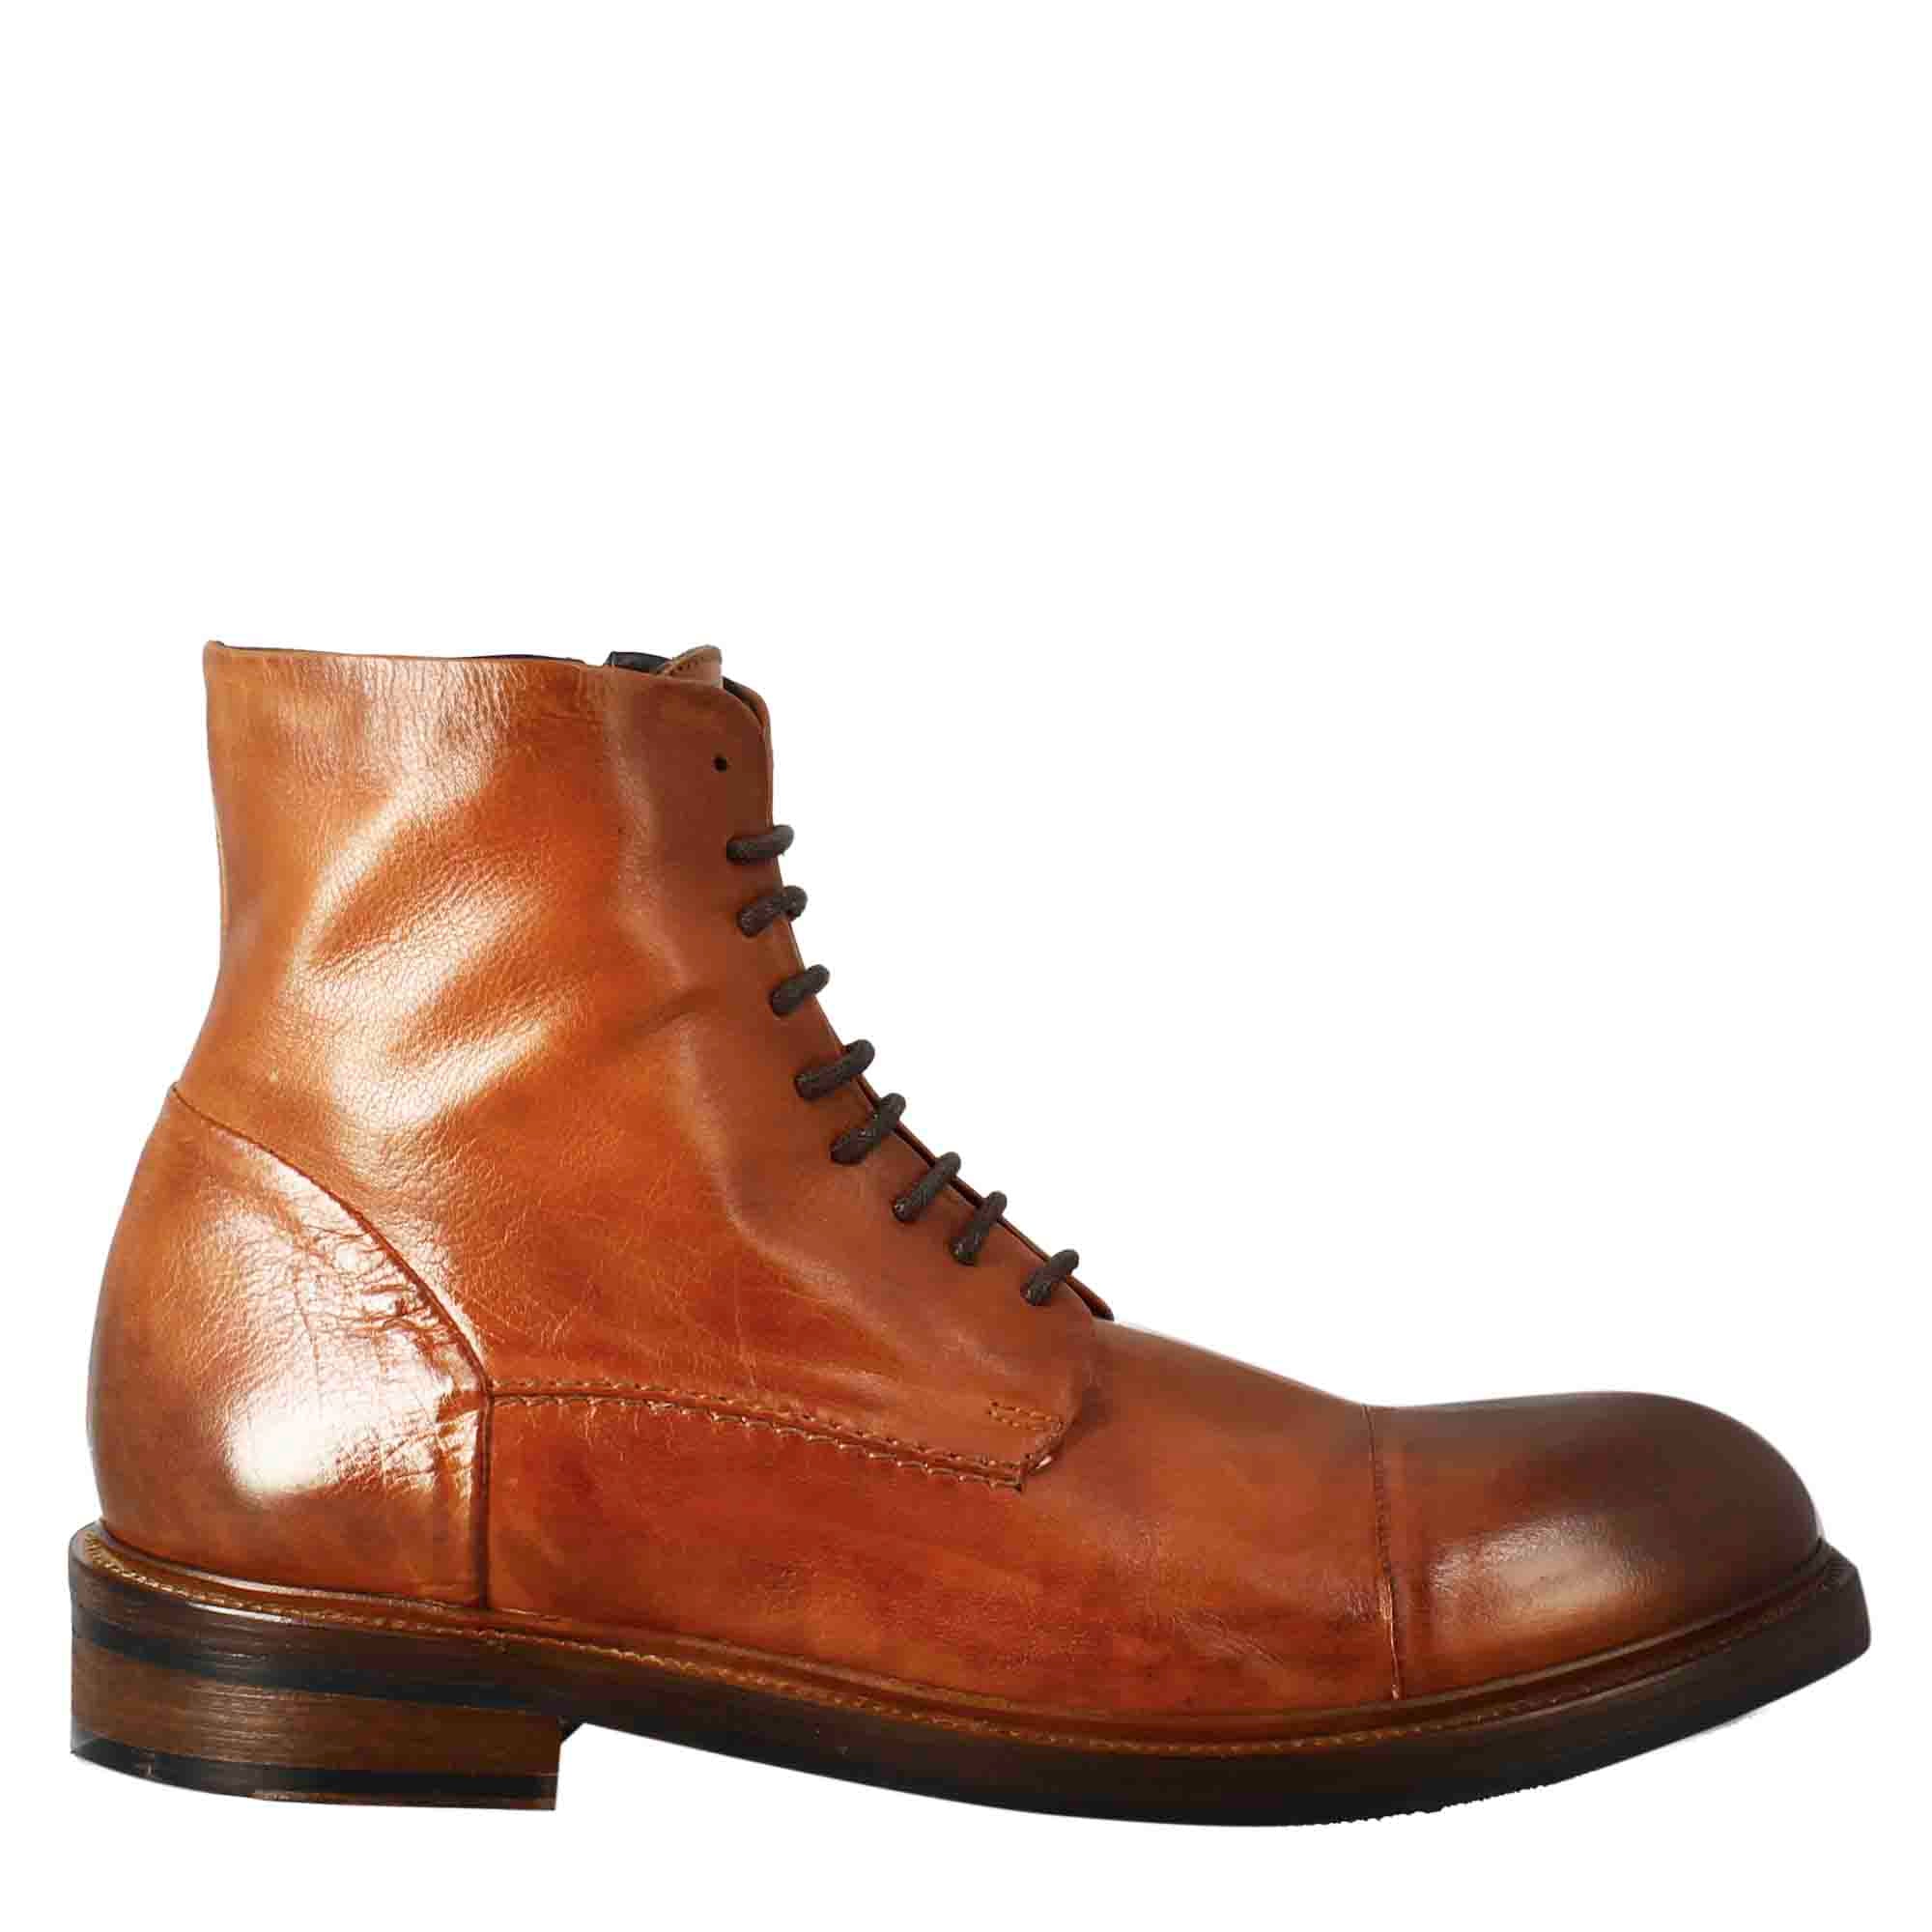 Tan Washed Leather Amphibian Boots